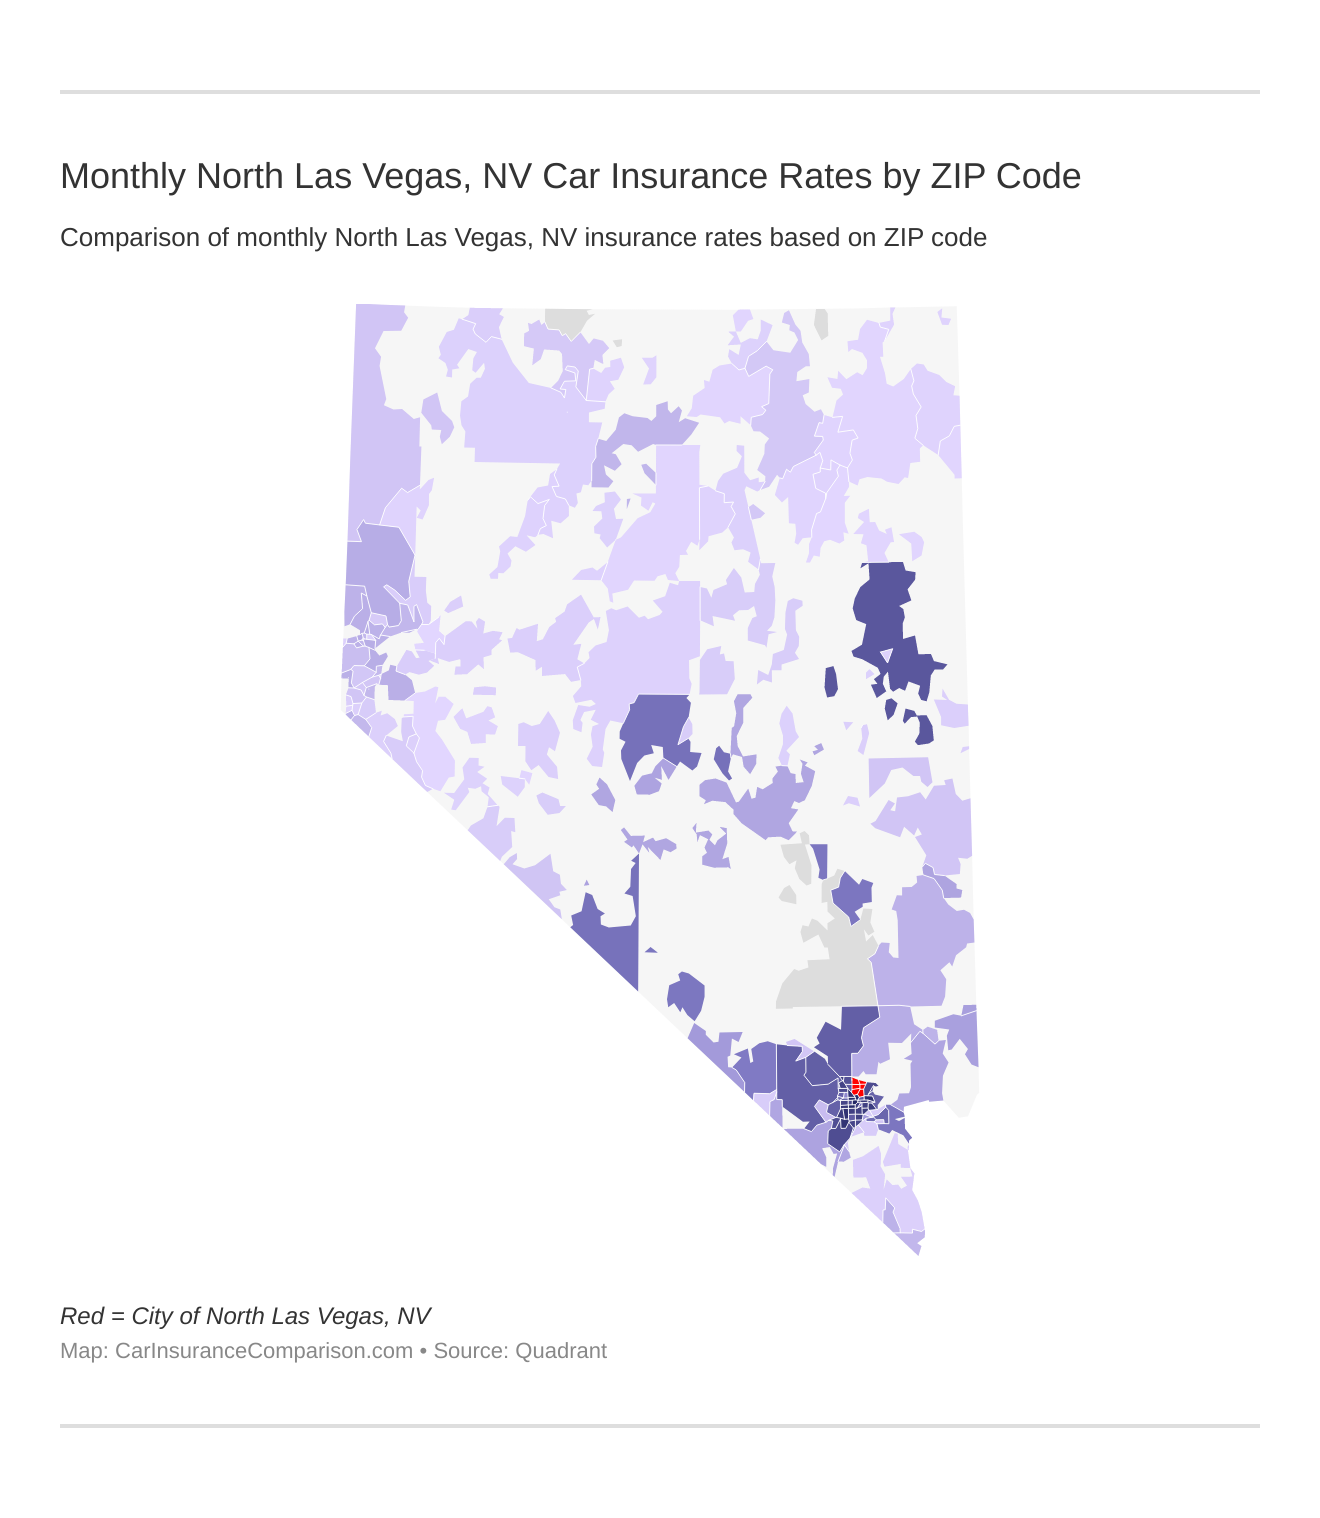 Monthly North Las Vegas, NV Car Insurance Rates by ZIP Code